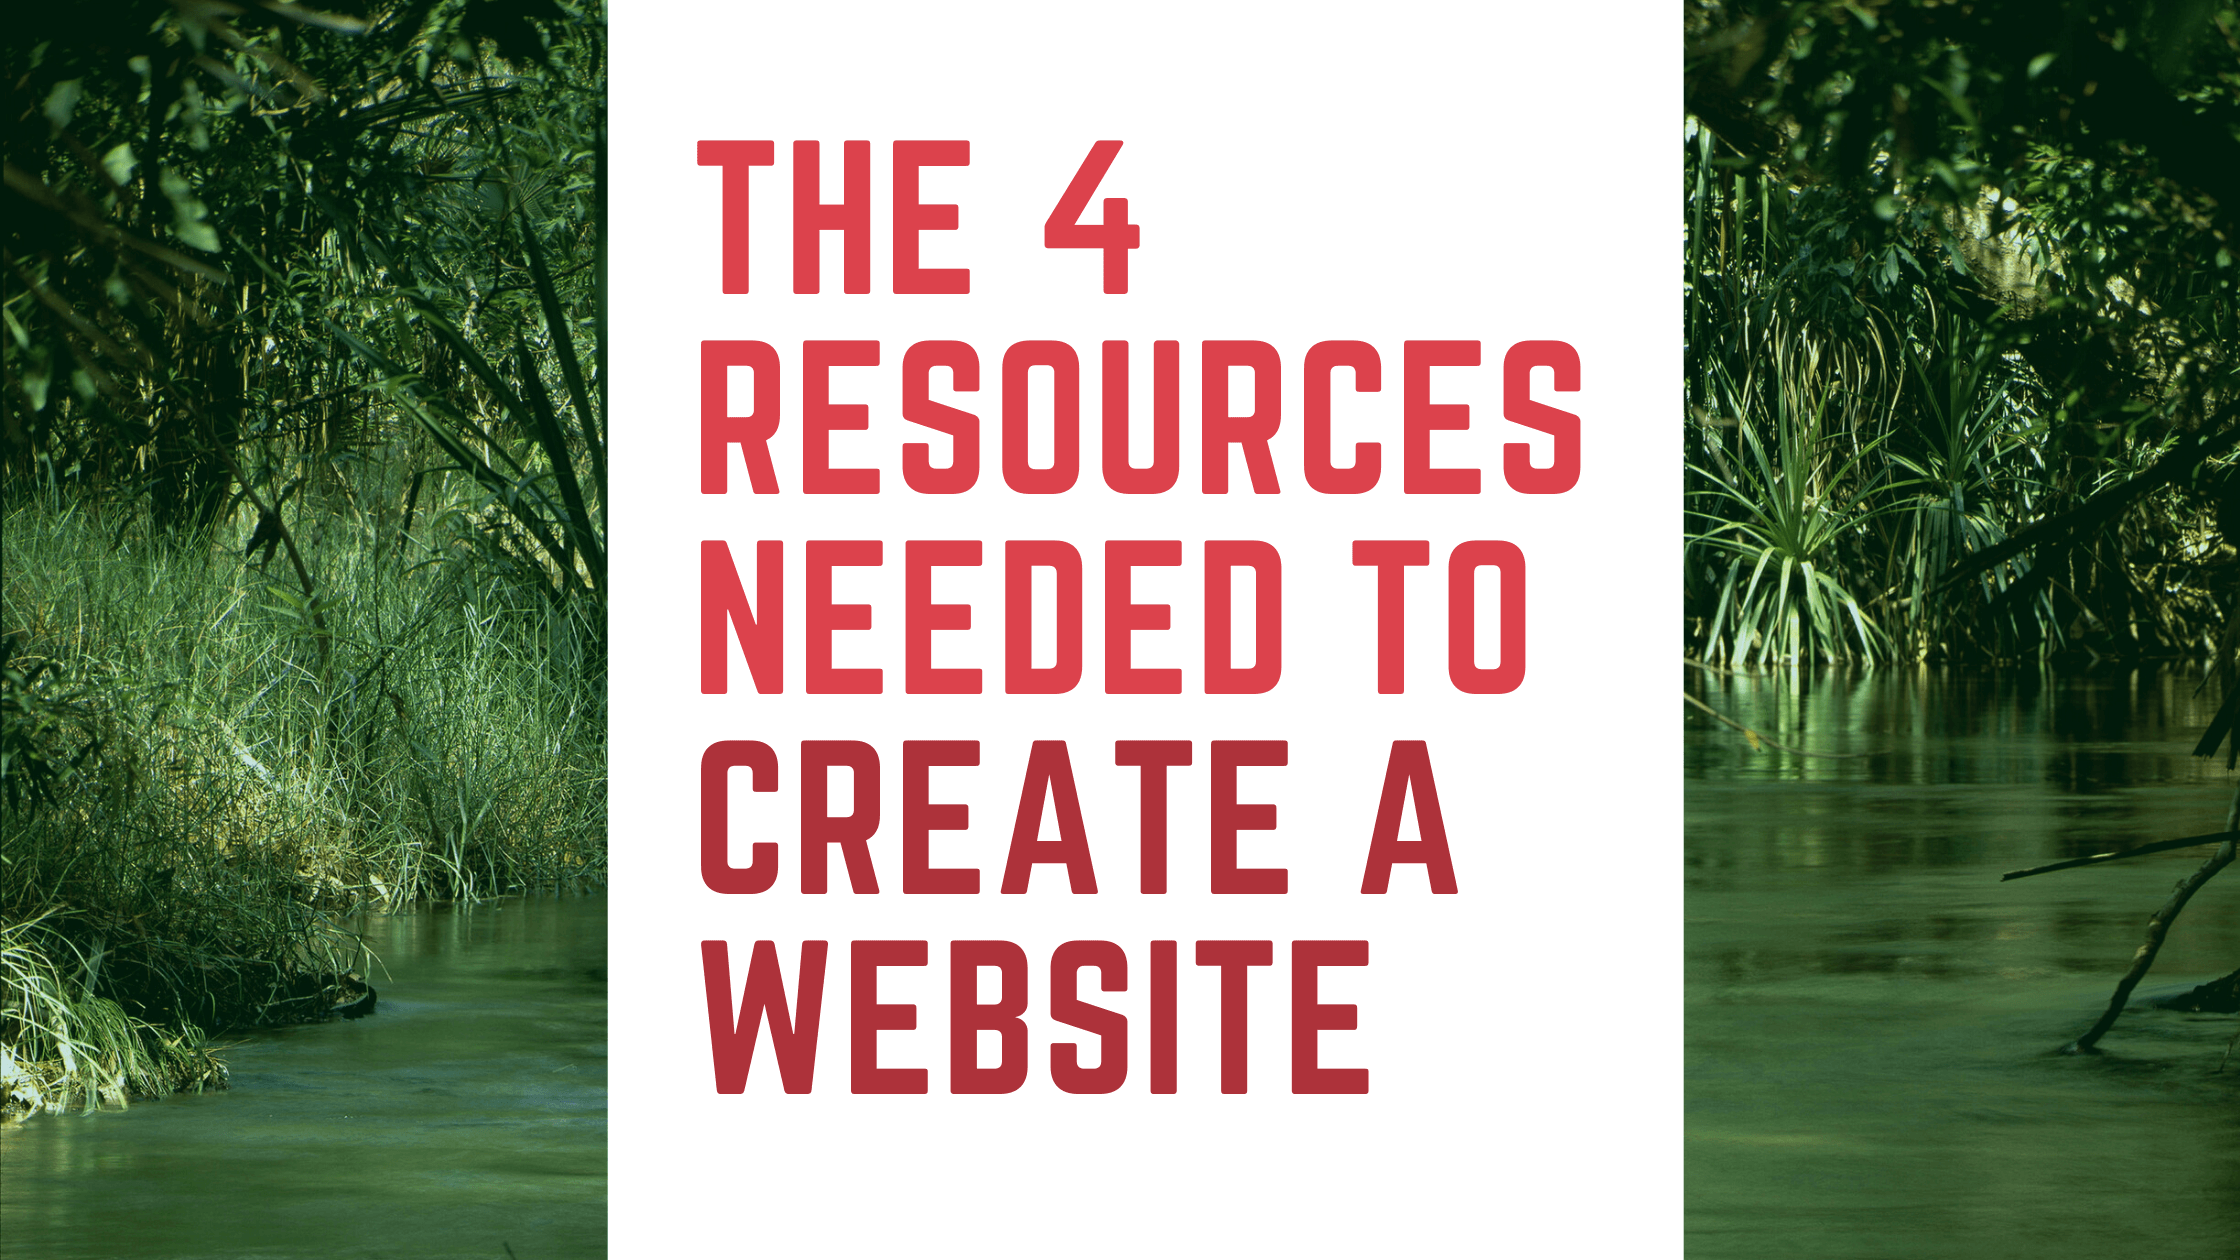 The 4 Resources Needed to Create a Website text on jungle background